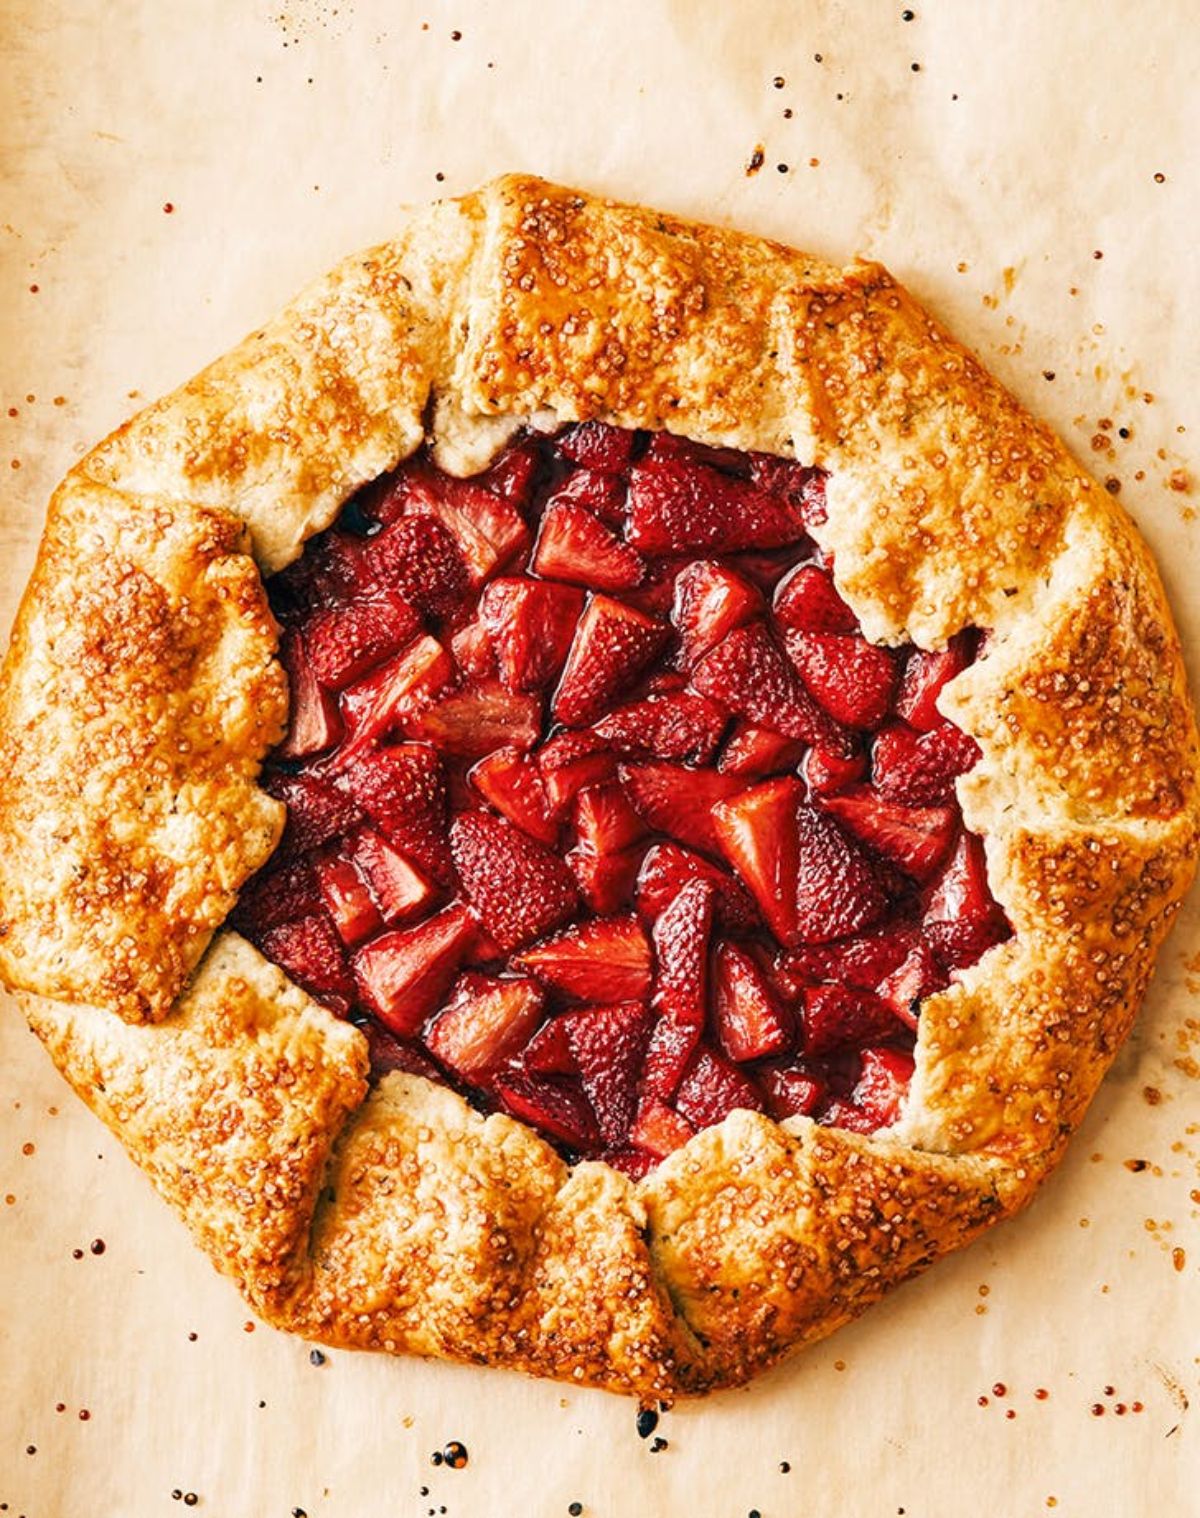 Mouth-watering strawberry galette with whipped cream.